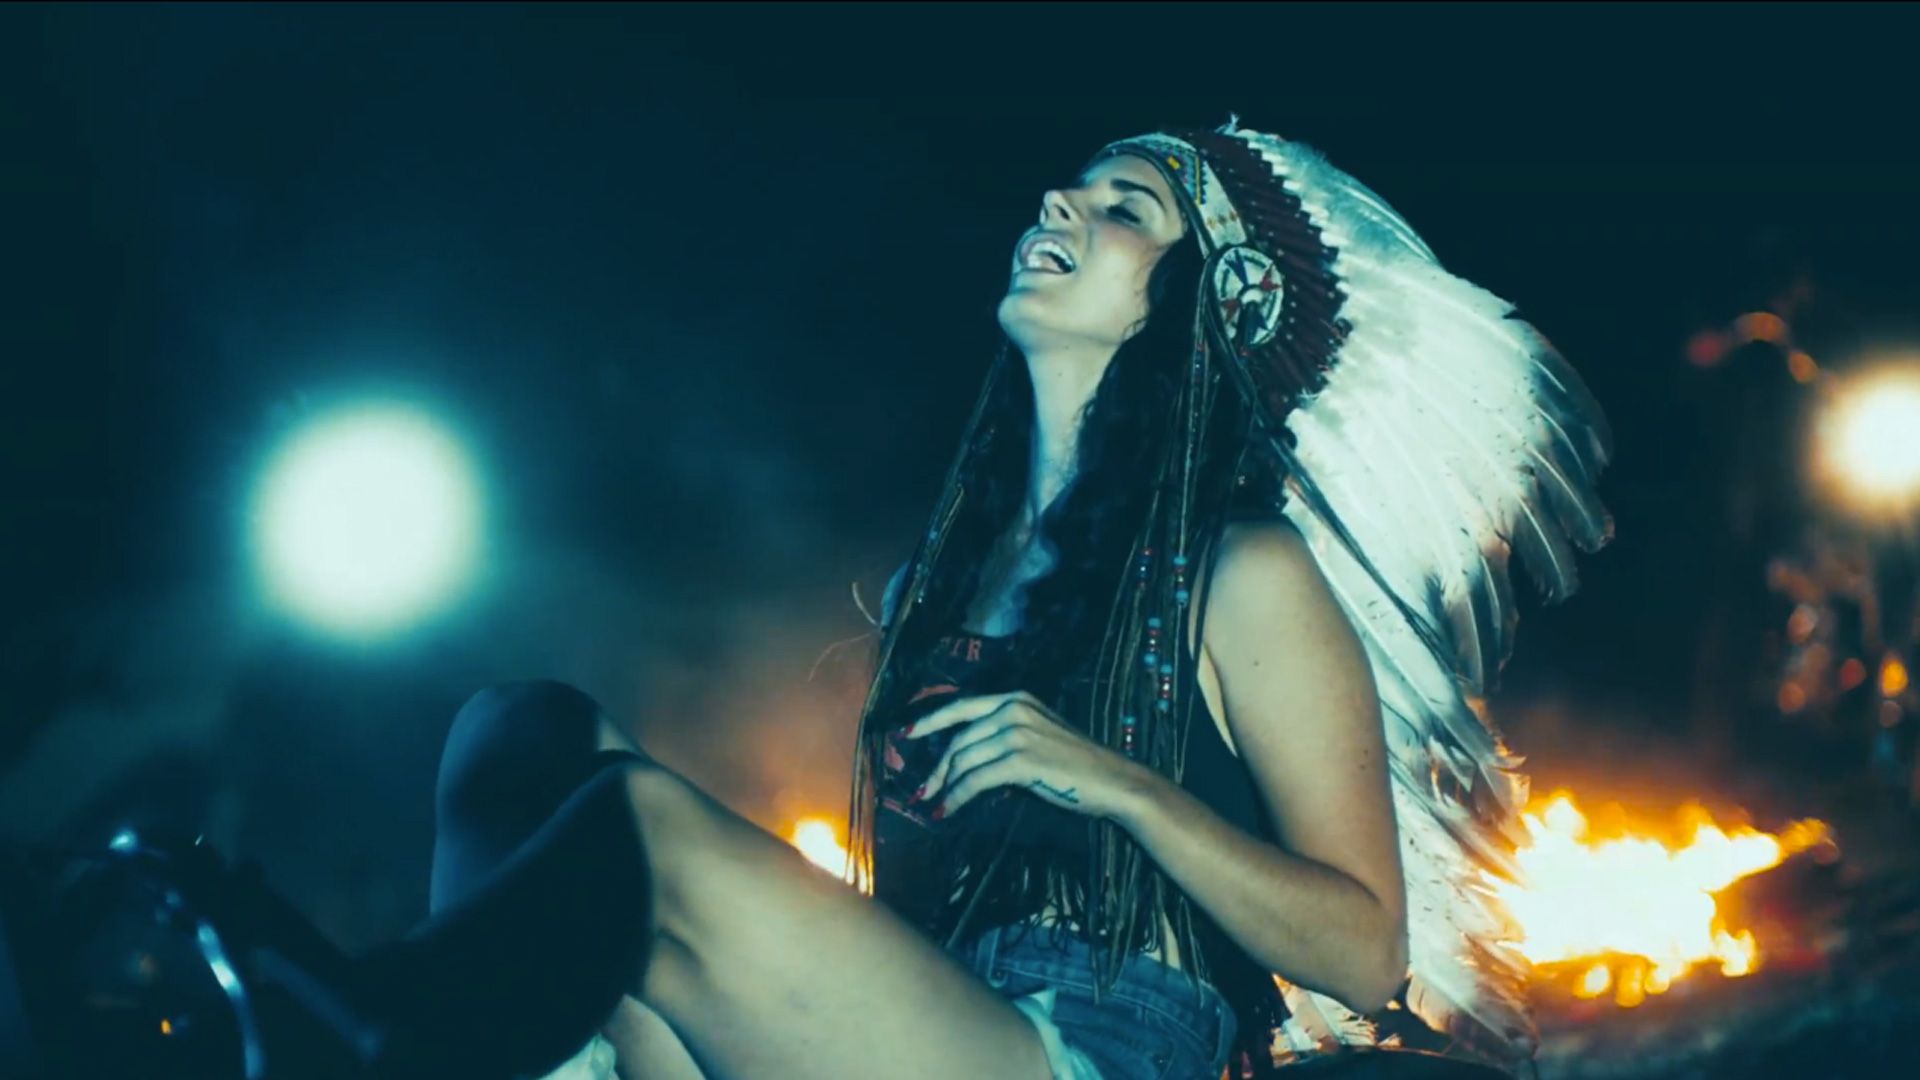 A woman wearing a Native American headdress sits on the ground laughing. - Lana Del Rey